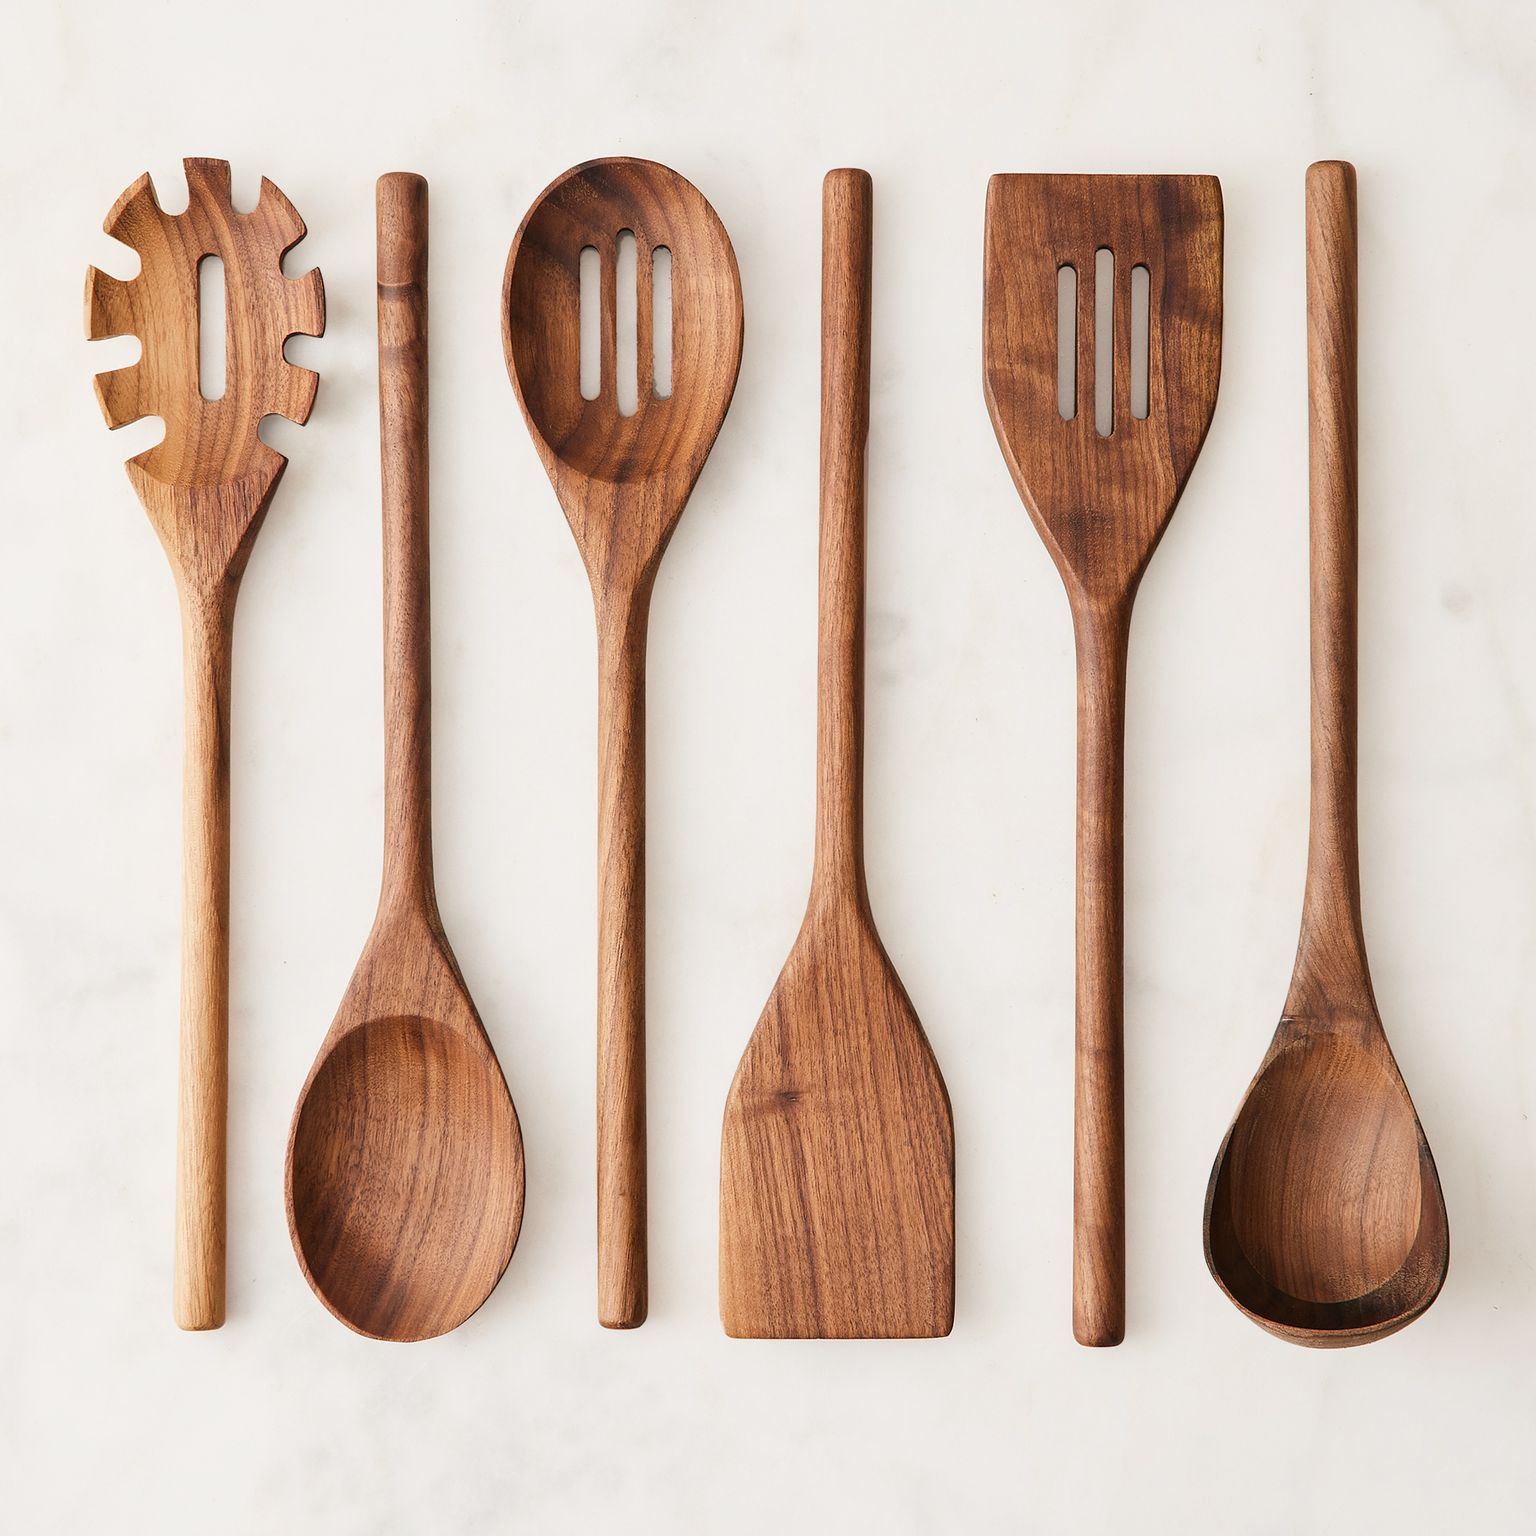 Farmhouse Pottery Essential Kitchen Utensils - Set of Six (6) in